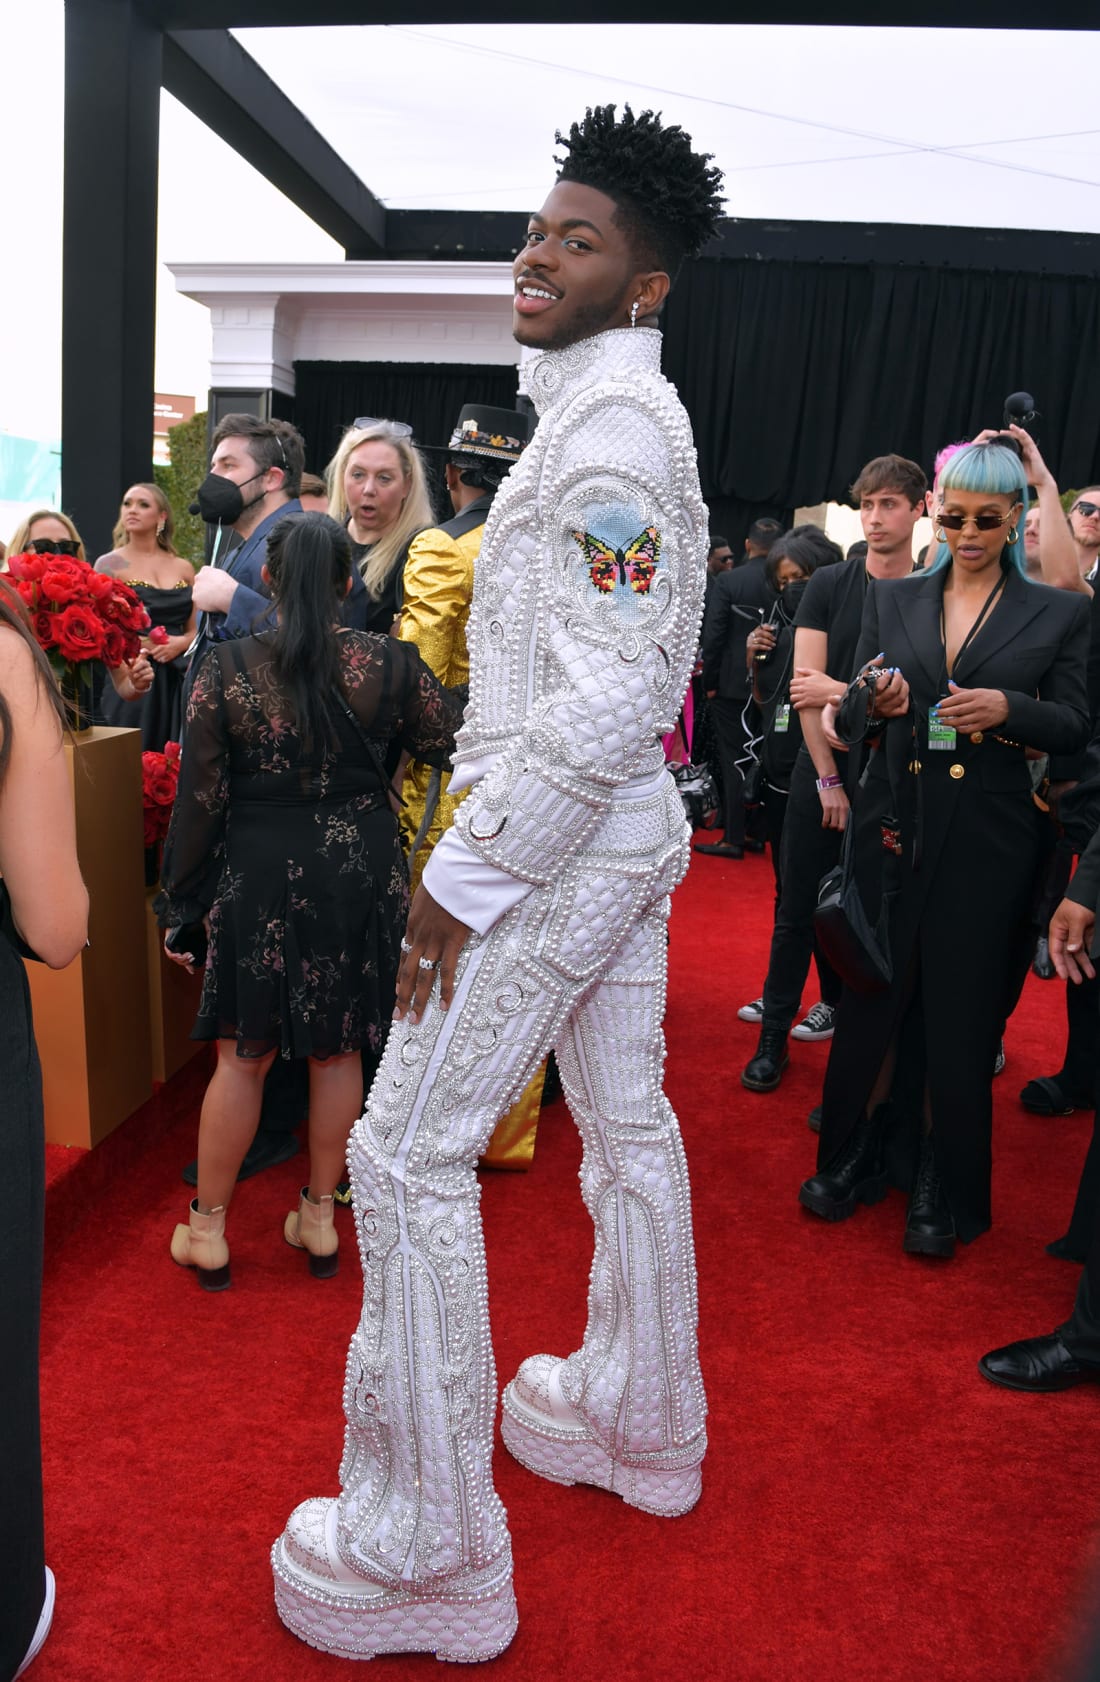 Lil Nas X wore an embroidered custom suit by Balmain.